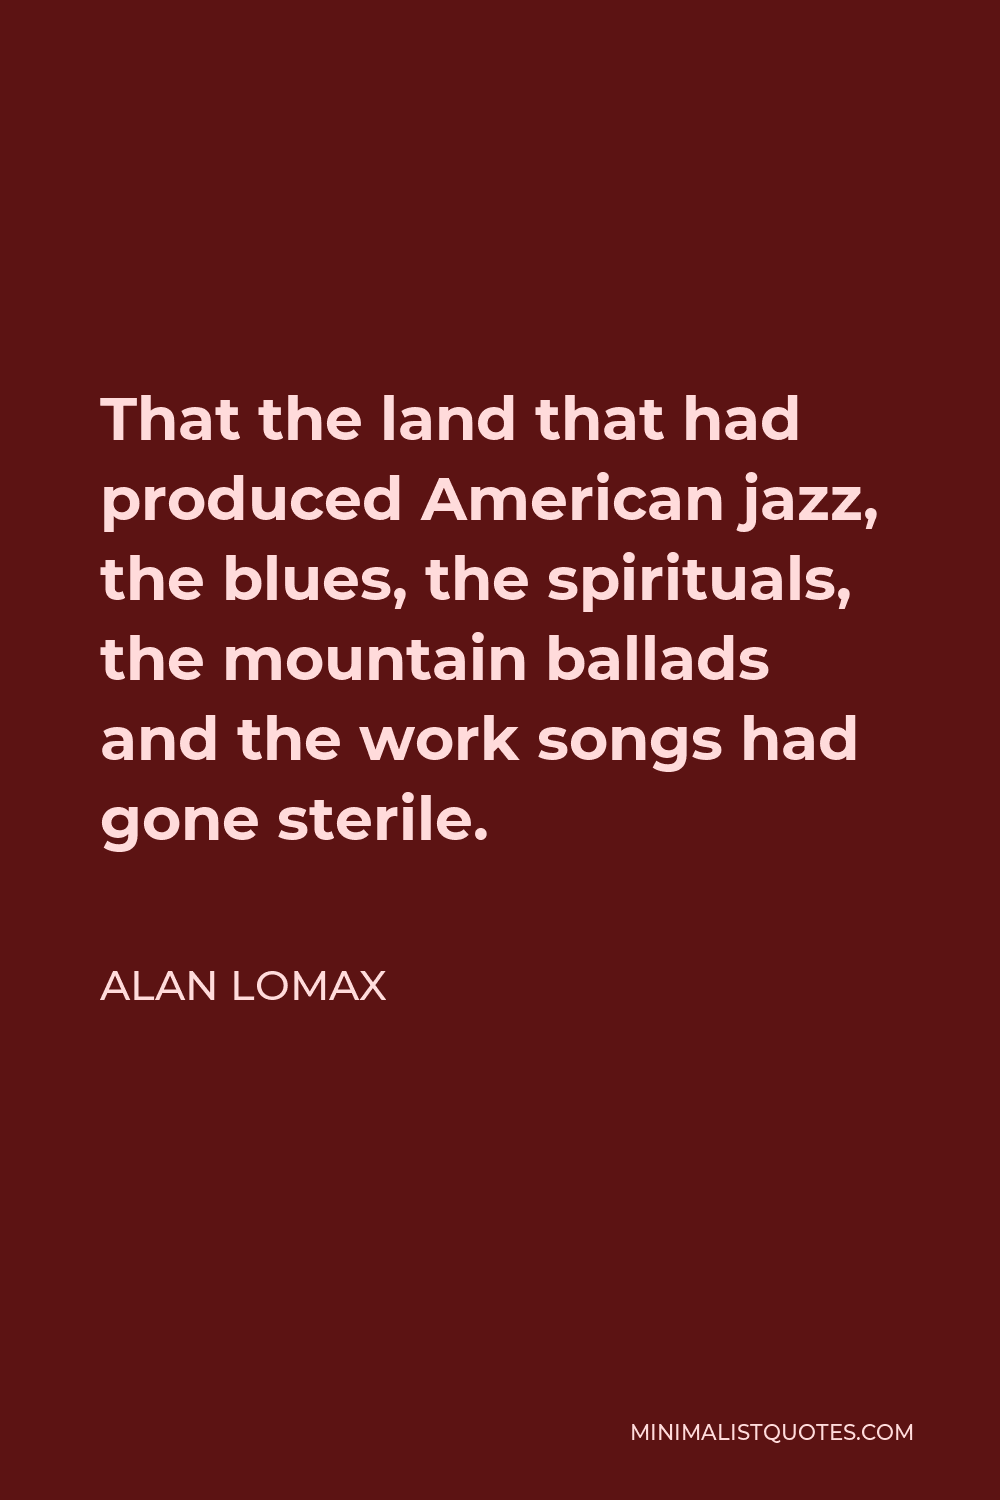 Alan Lomax Quote - That the land that had produced American jazz, the blues, the spirituals, the mountain ballads and the work songs had gone sterile.